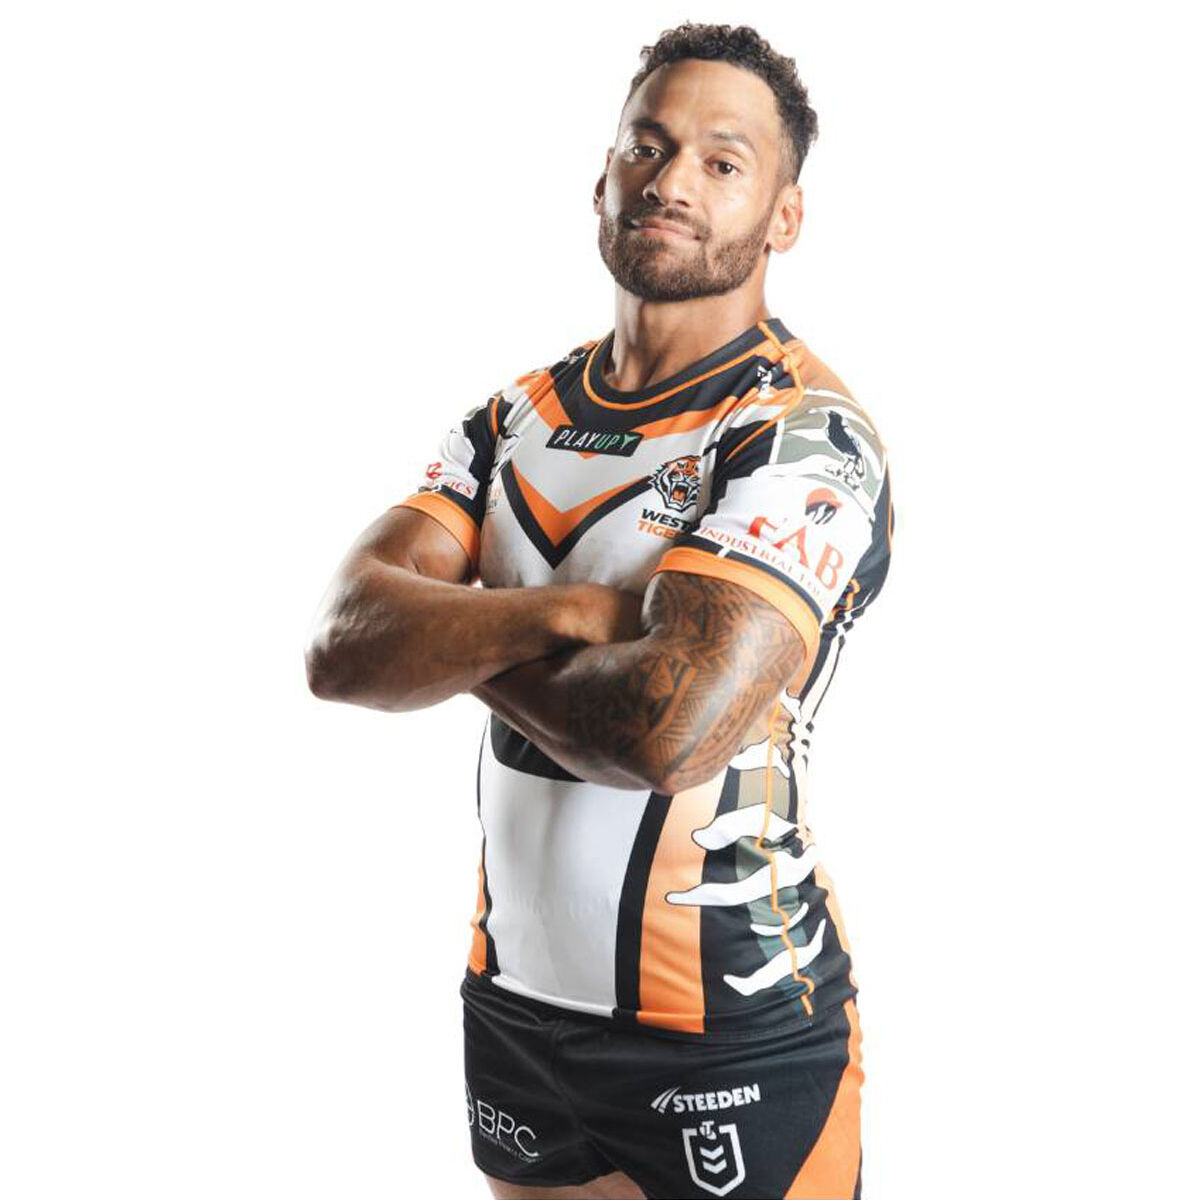 2023 Tigers Captains Run Jersey I don't even know what to say. Thoughts?  #nrl #tigers #weststigers #jersey #nrljerseys